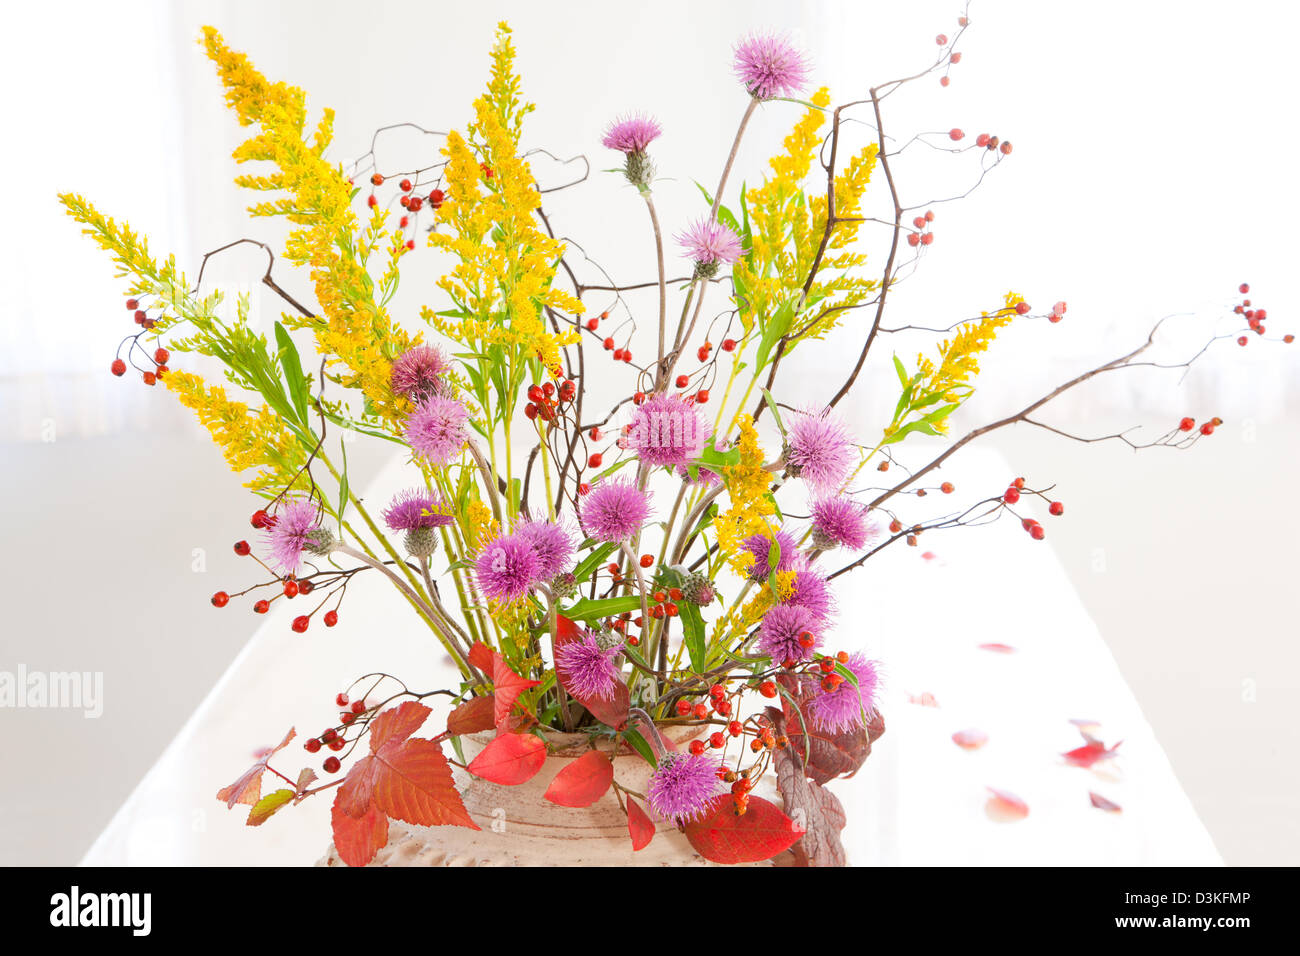 Wildflowers in a vase Stock Photo